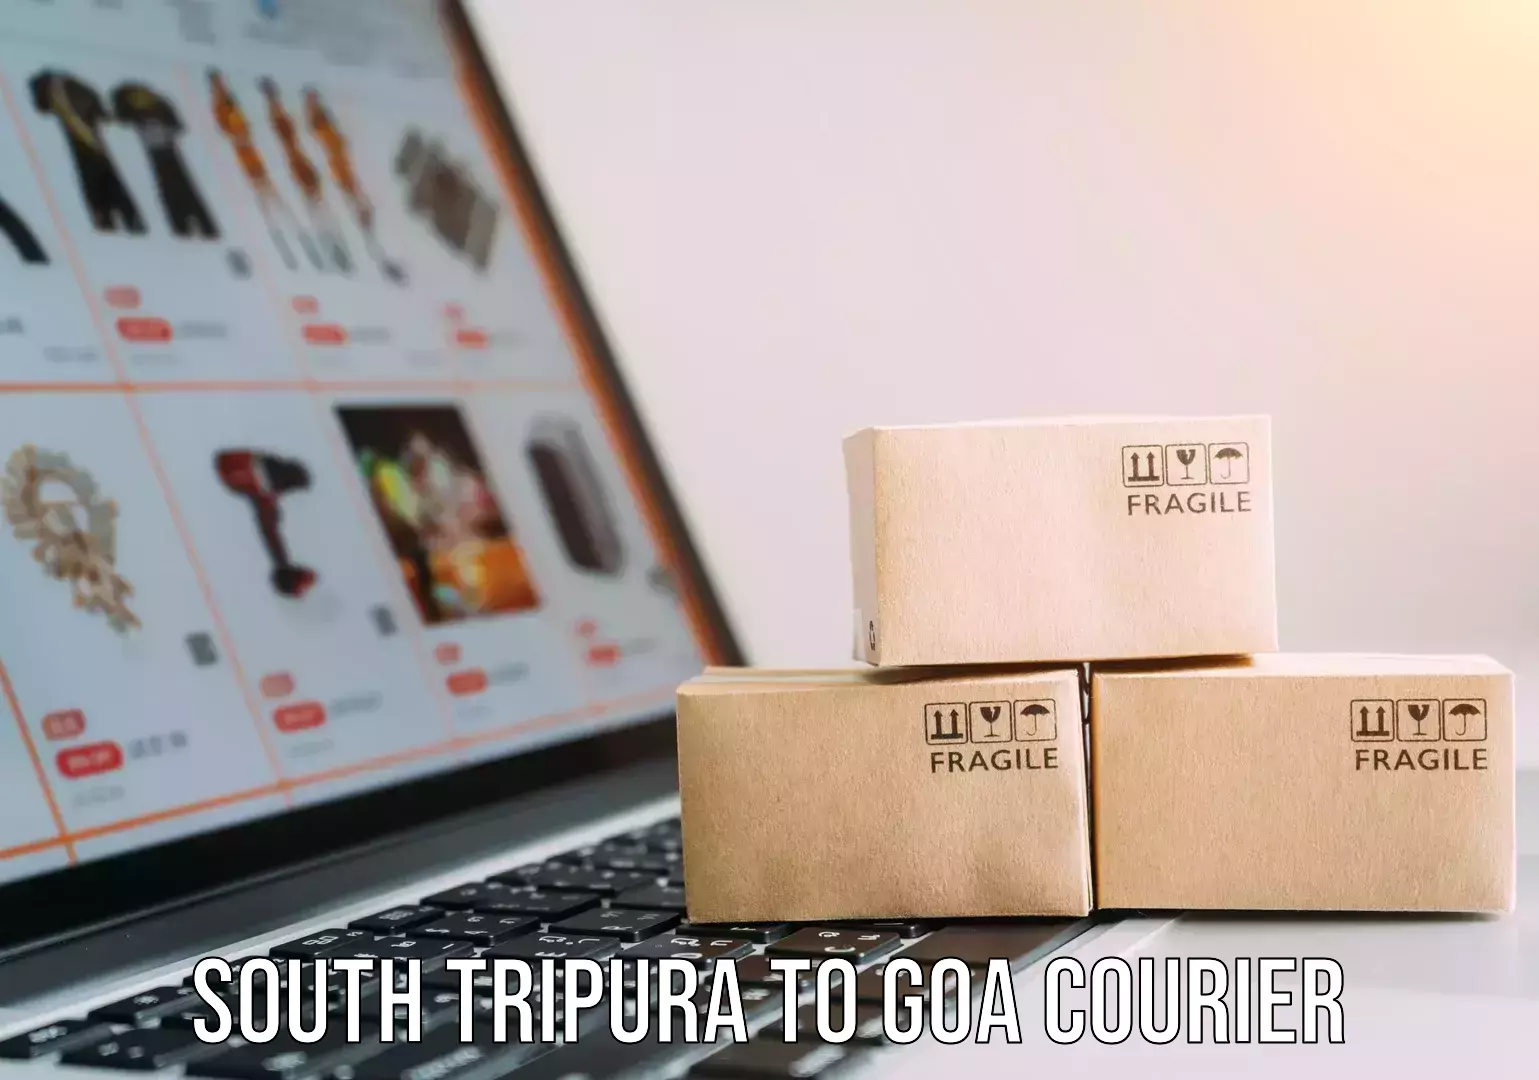 24/7 courier service in South Tripura to Goa